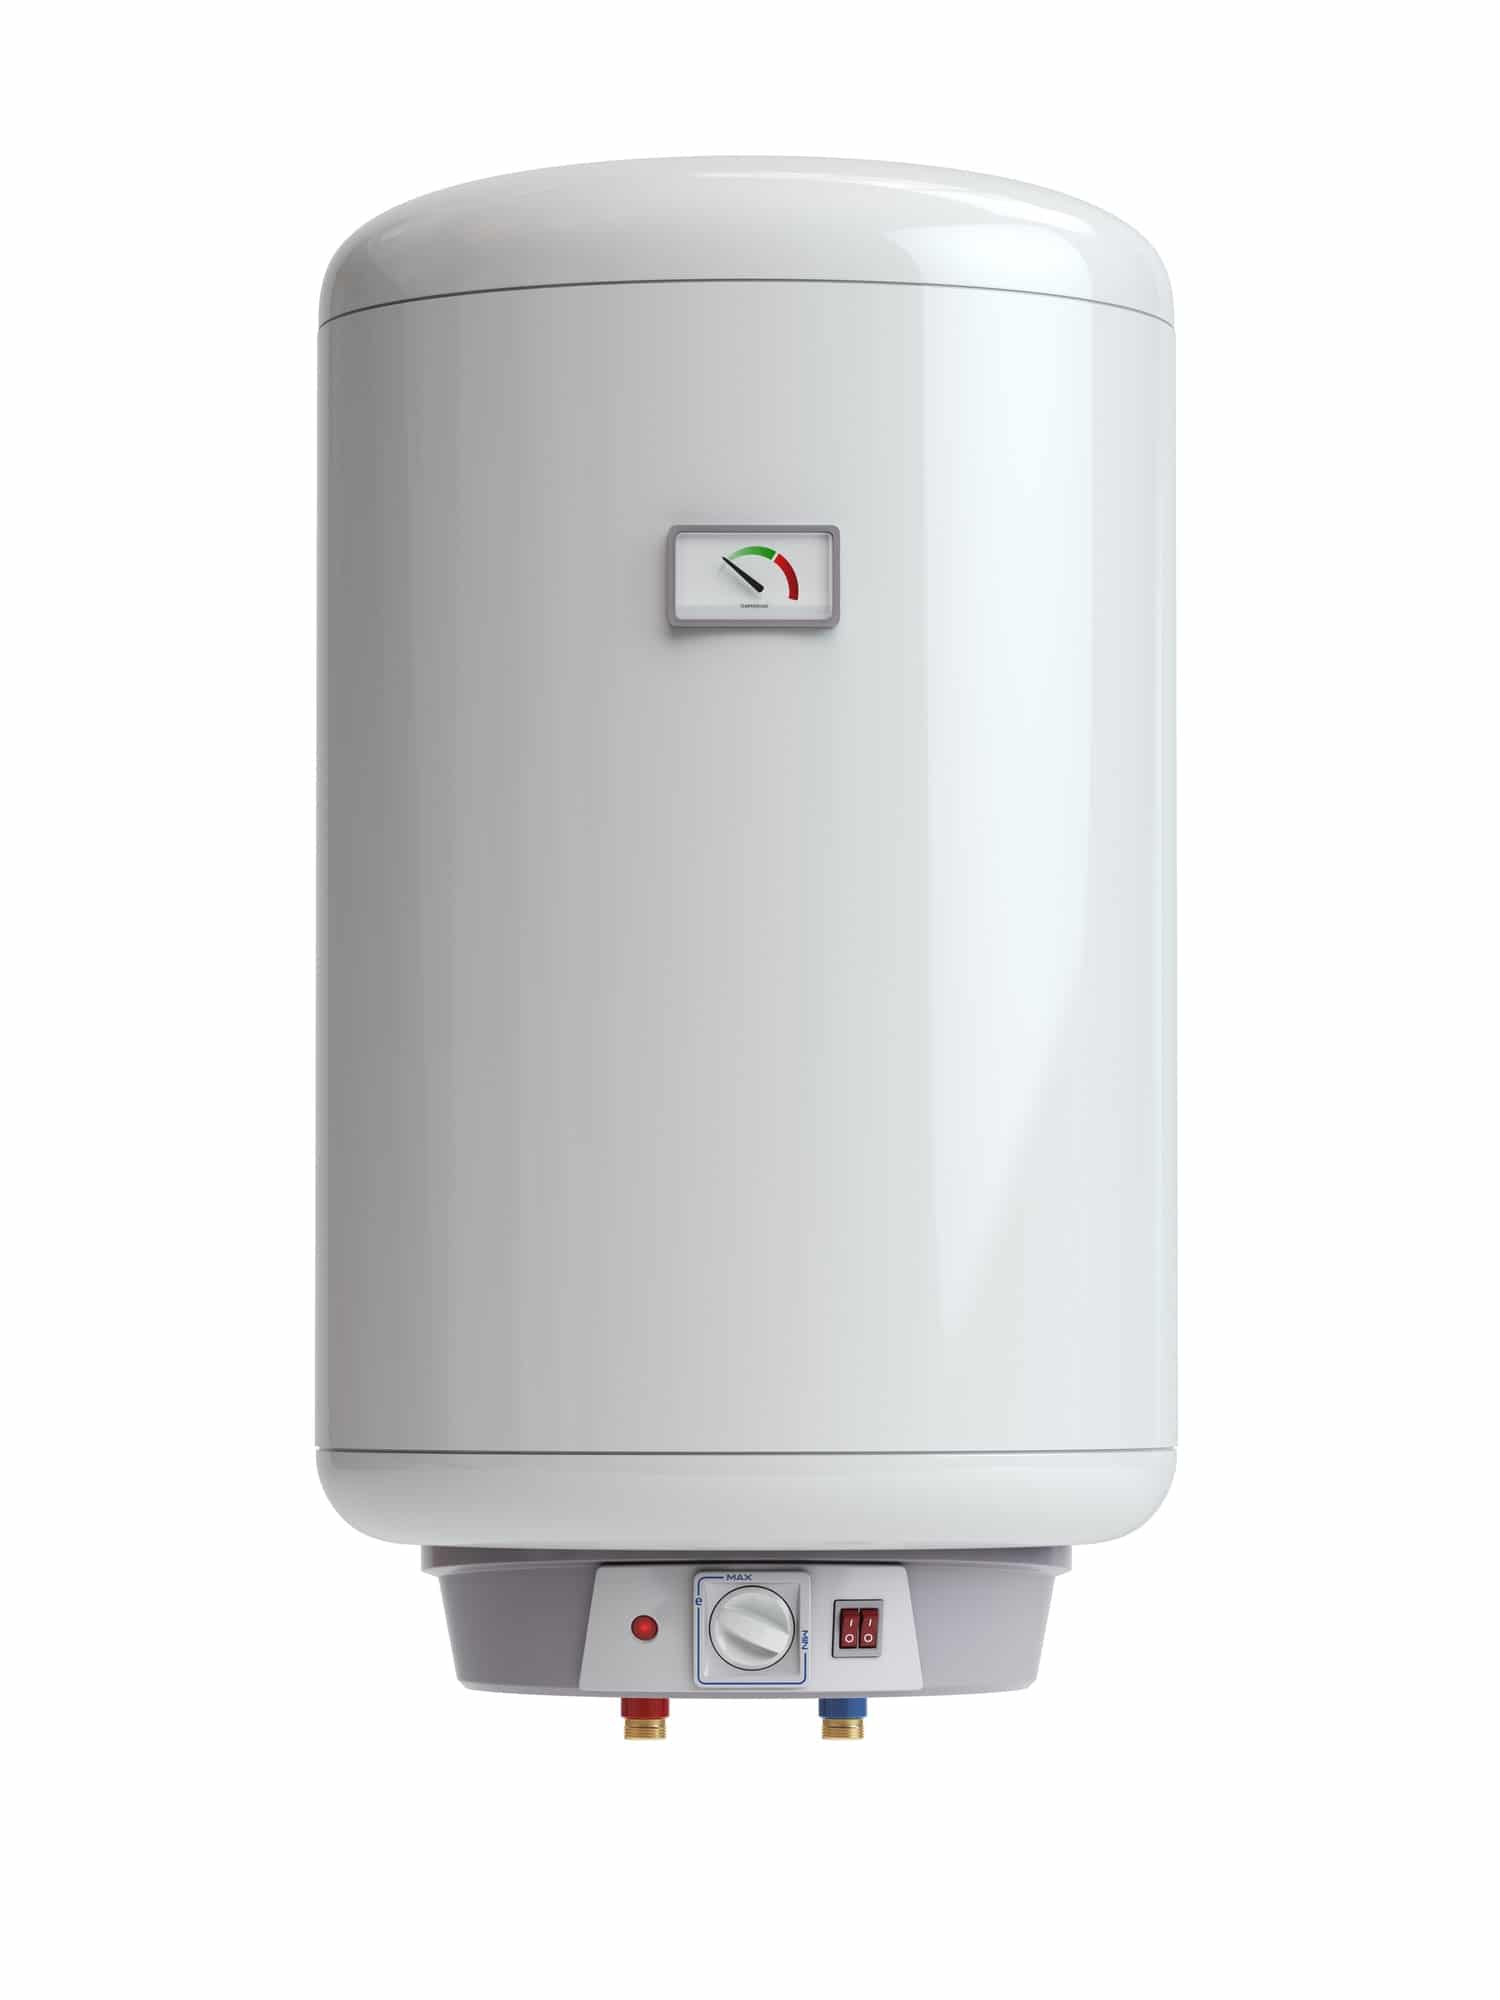 Electric boiler, water heater isolated on white background.